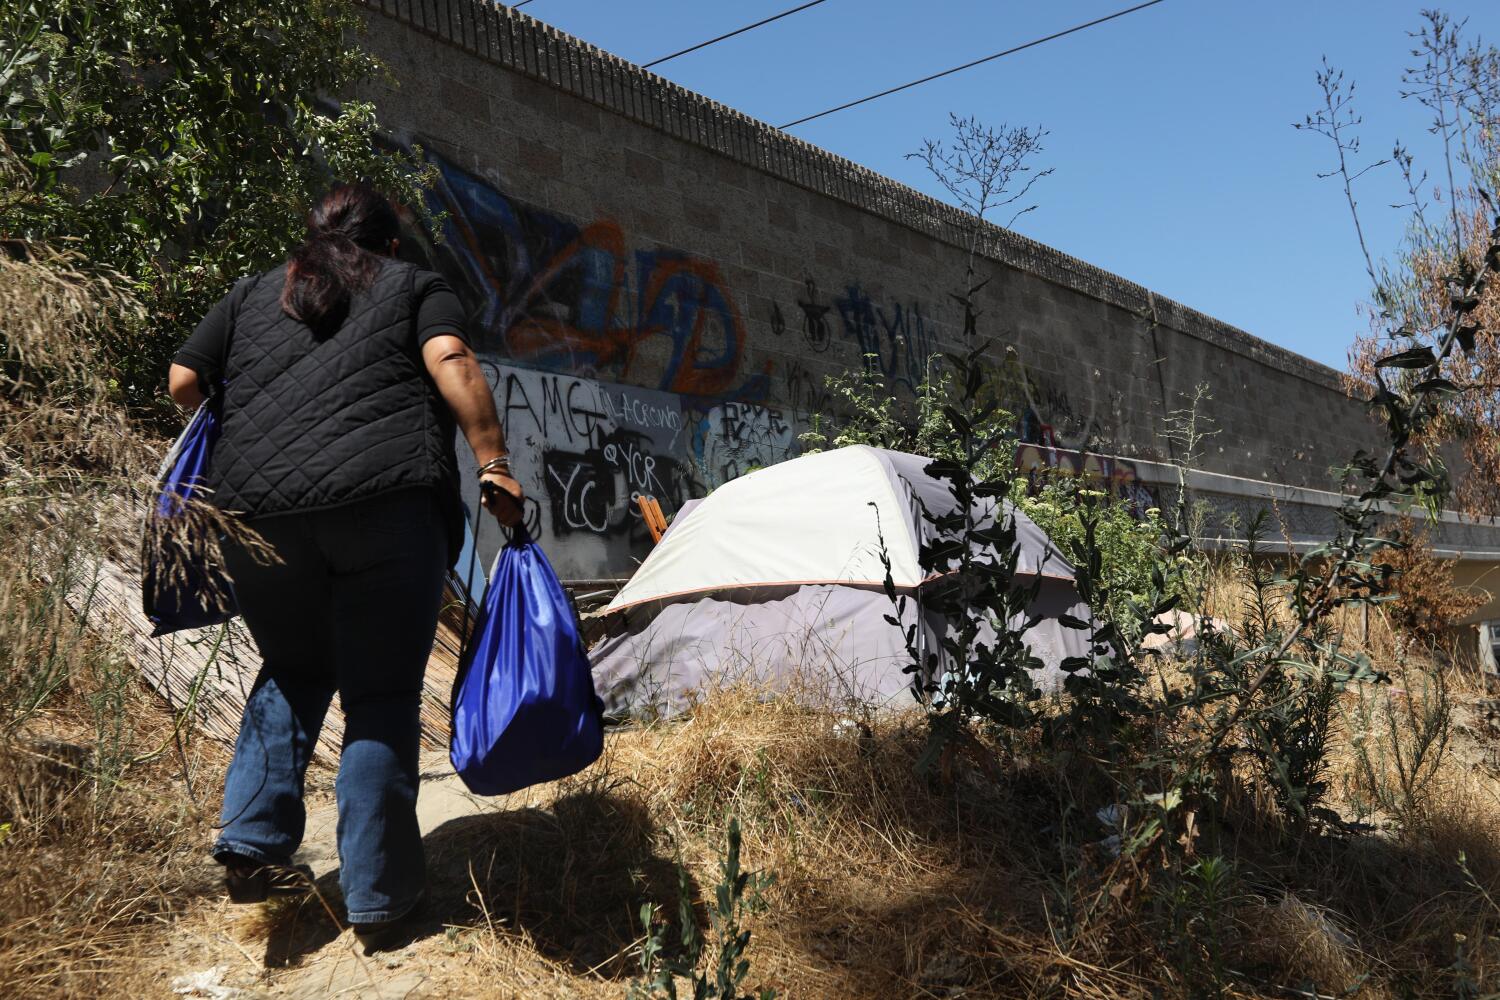 homeless-initiative-awarded-$51.5-million-to-assist-105-freeway-and-river-encampments